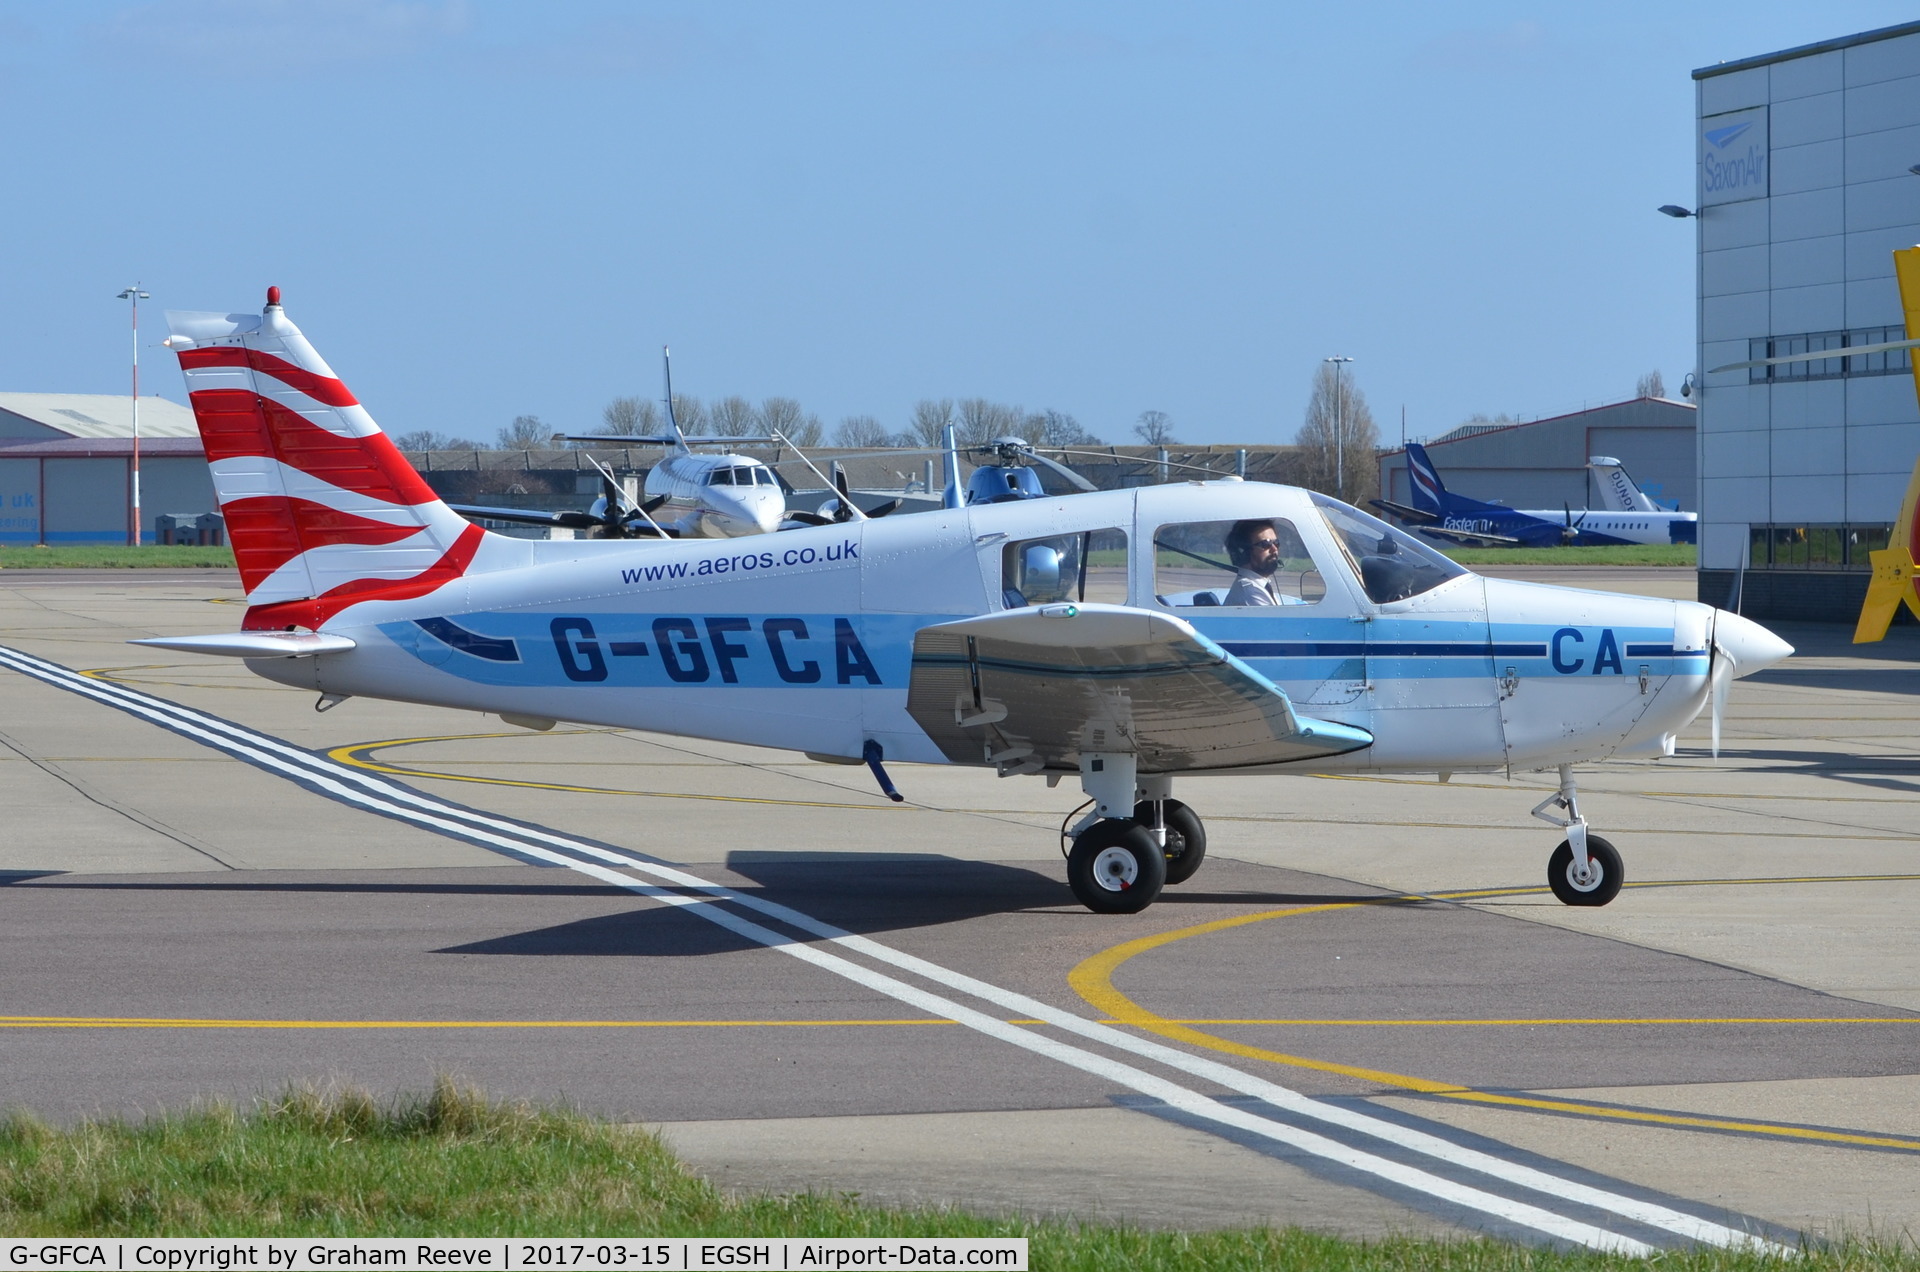 G-GFCA, 1989 Piper PA-28-161 Cadet C/N 28-41100, Just landed at Norwich.